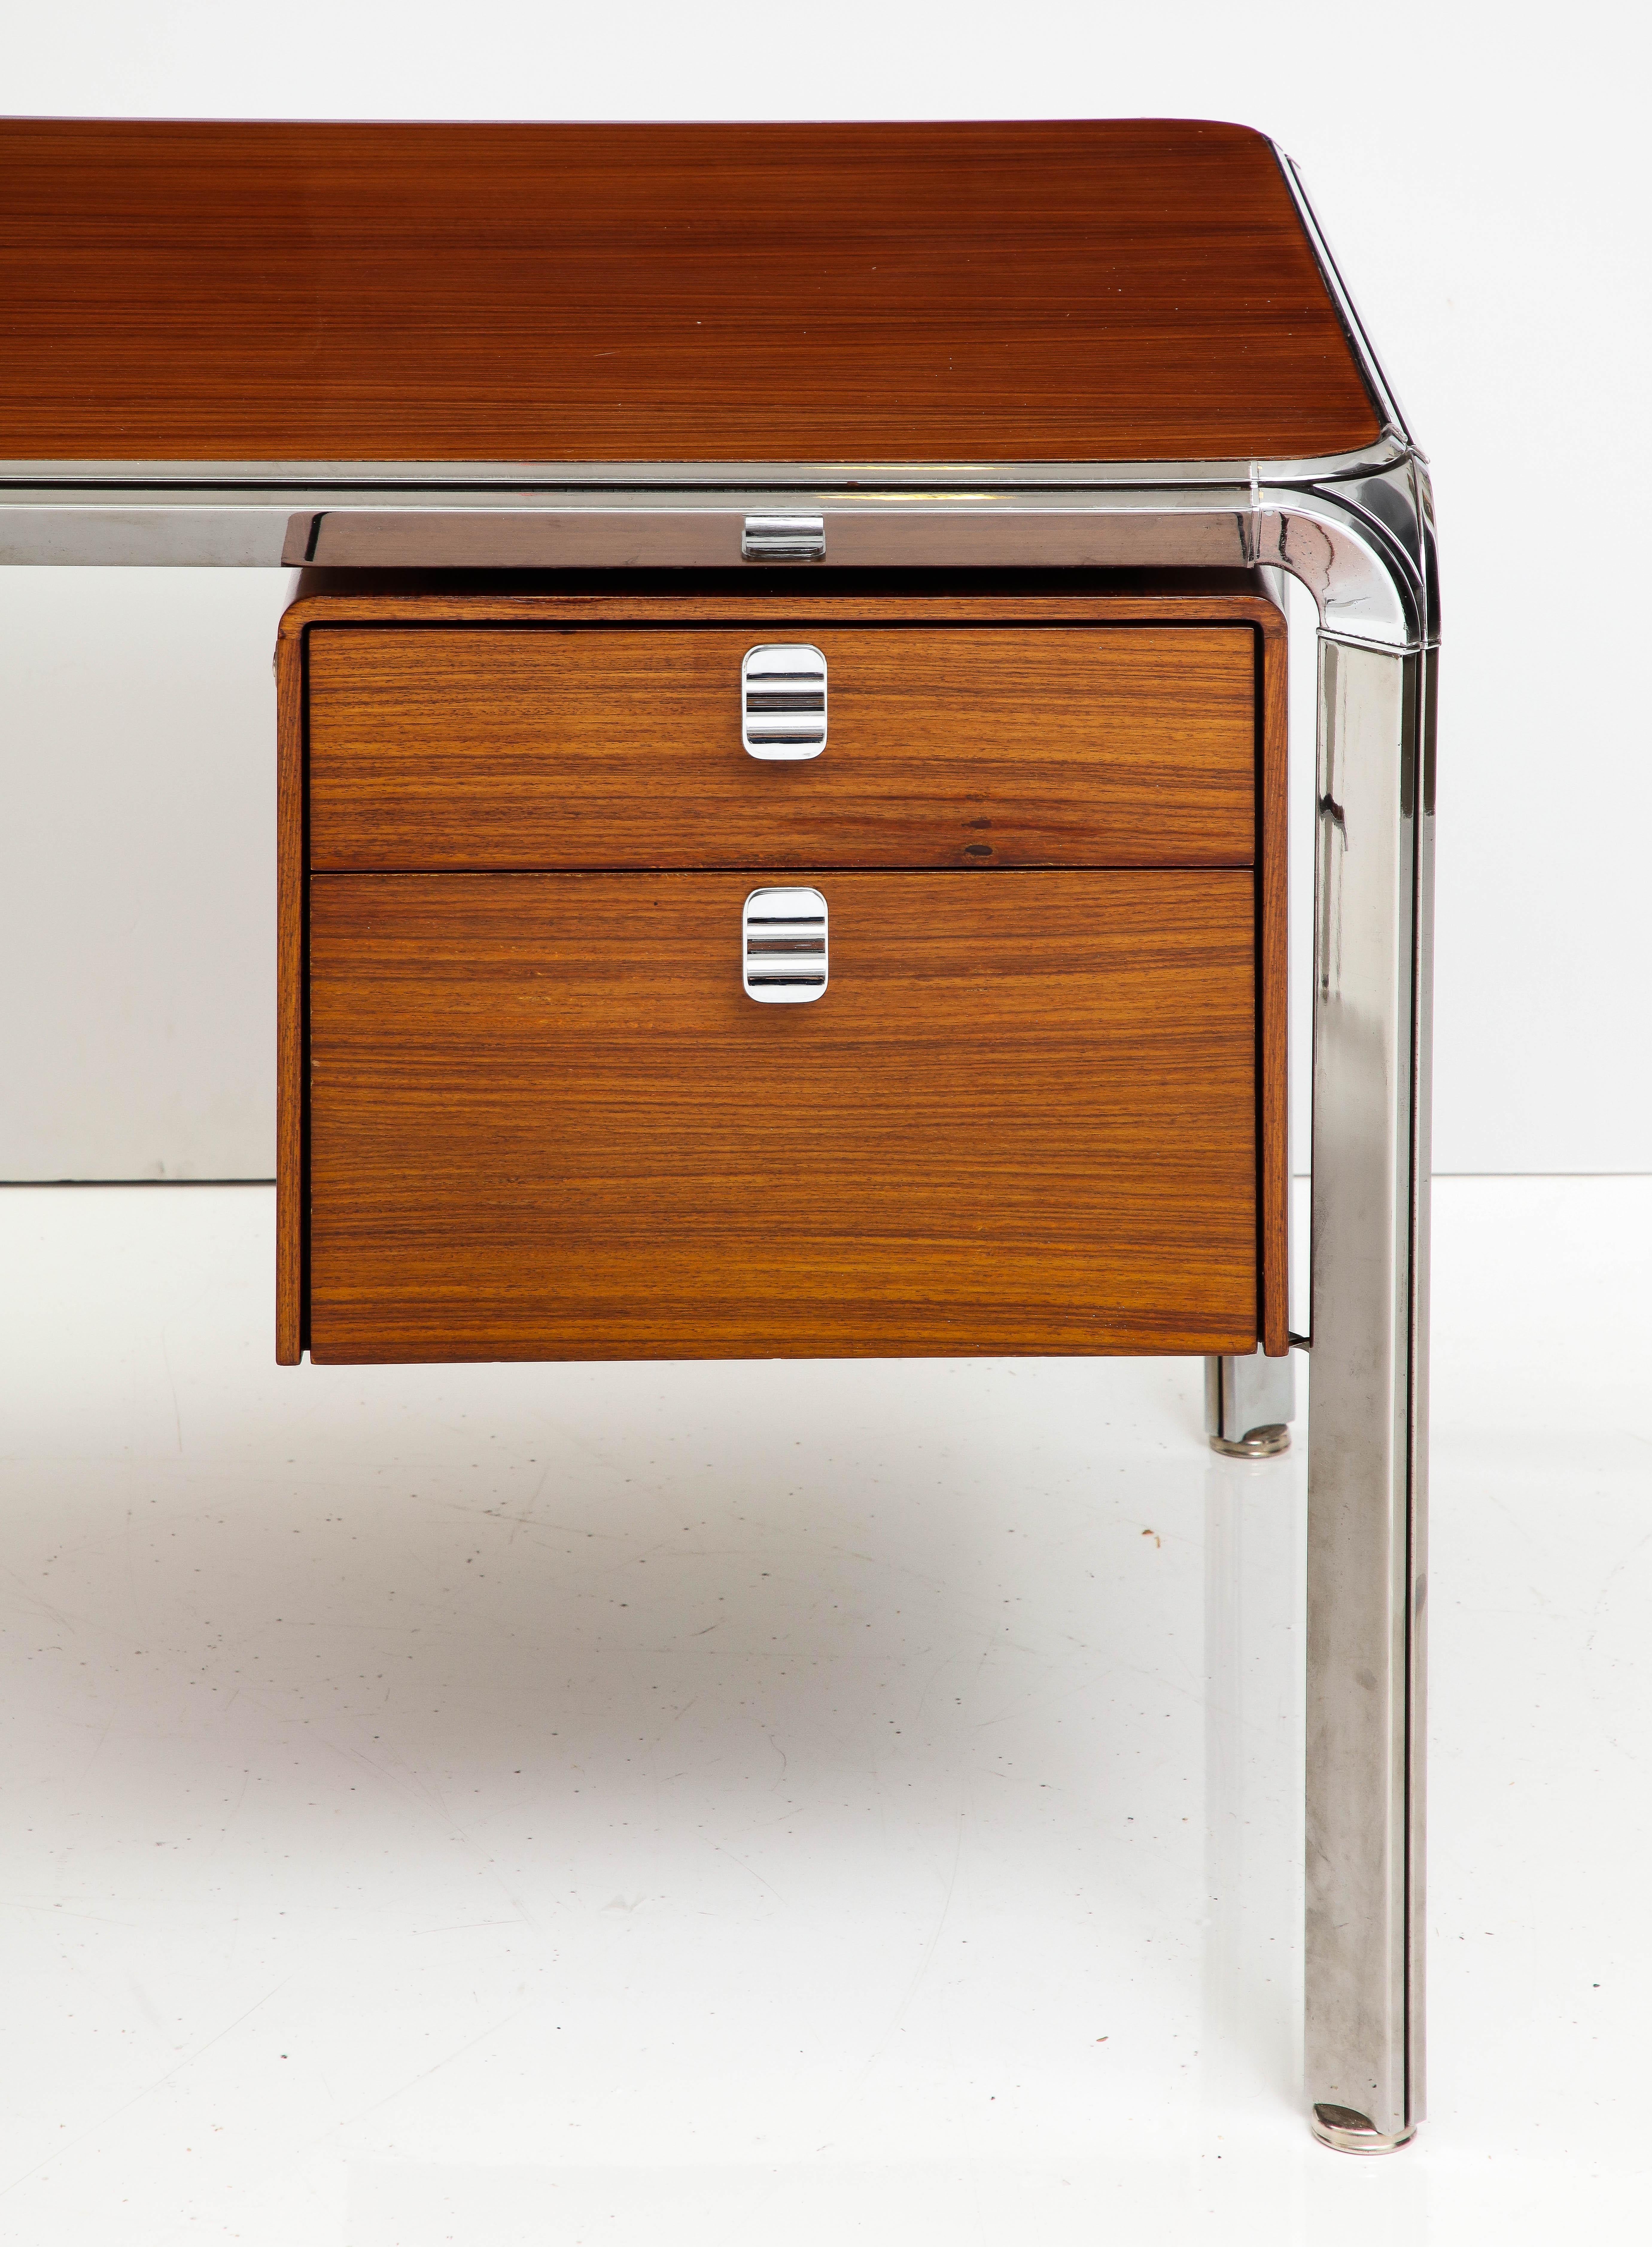 Teak and steel executive desk by Pierre Paulin, France, c. 1975. 

Sleek executive desk (model no. 250) in Burmese teak and polished stainless steel by esteemed French designer Pierre Paulin. Manufactured by Dassas, this desk is in excellent